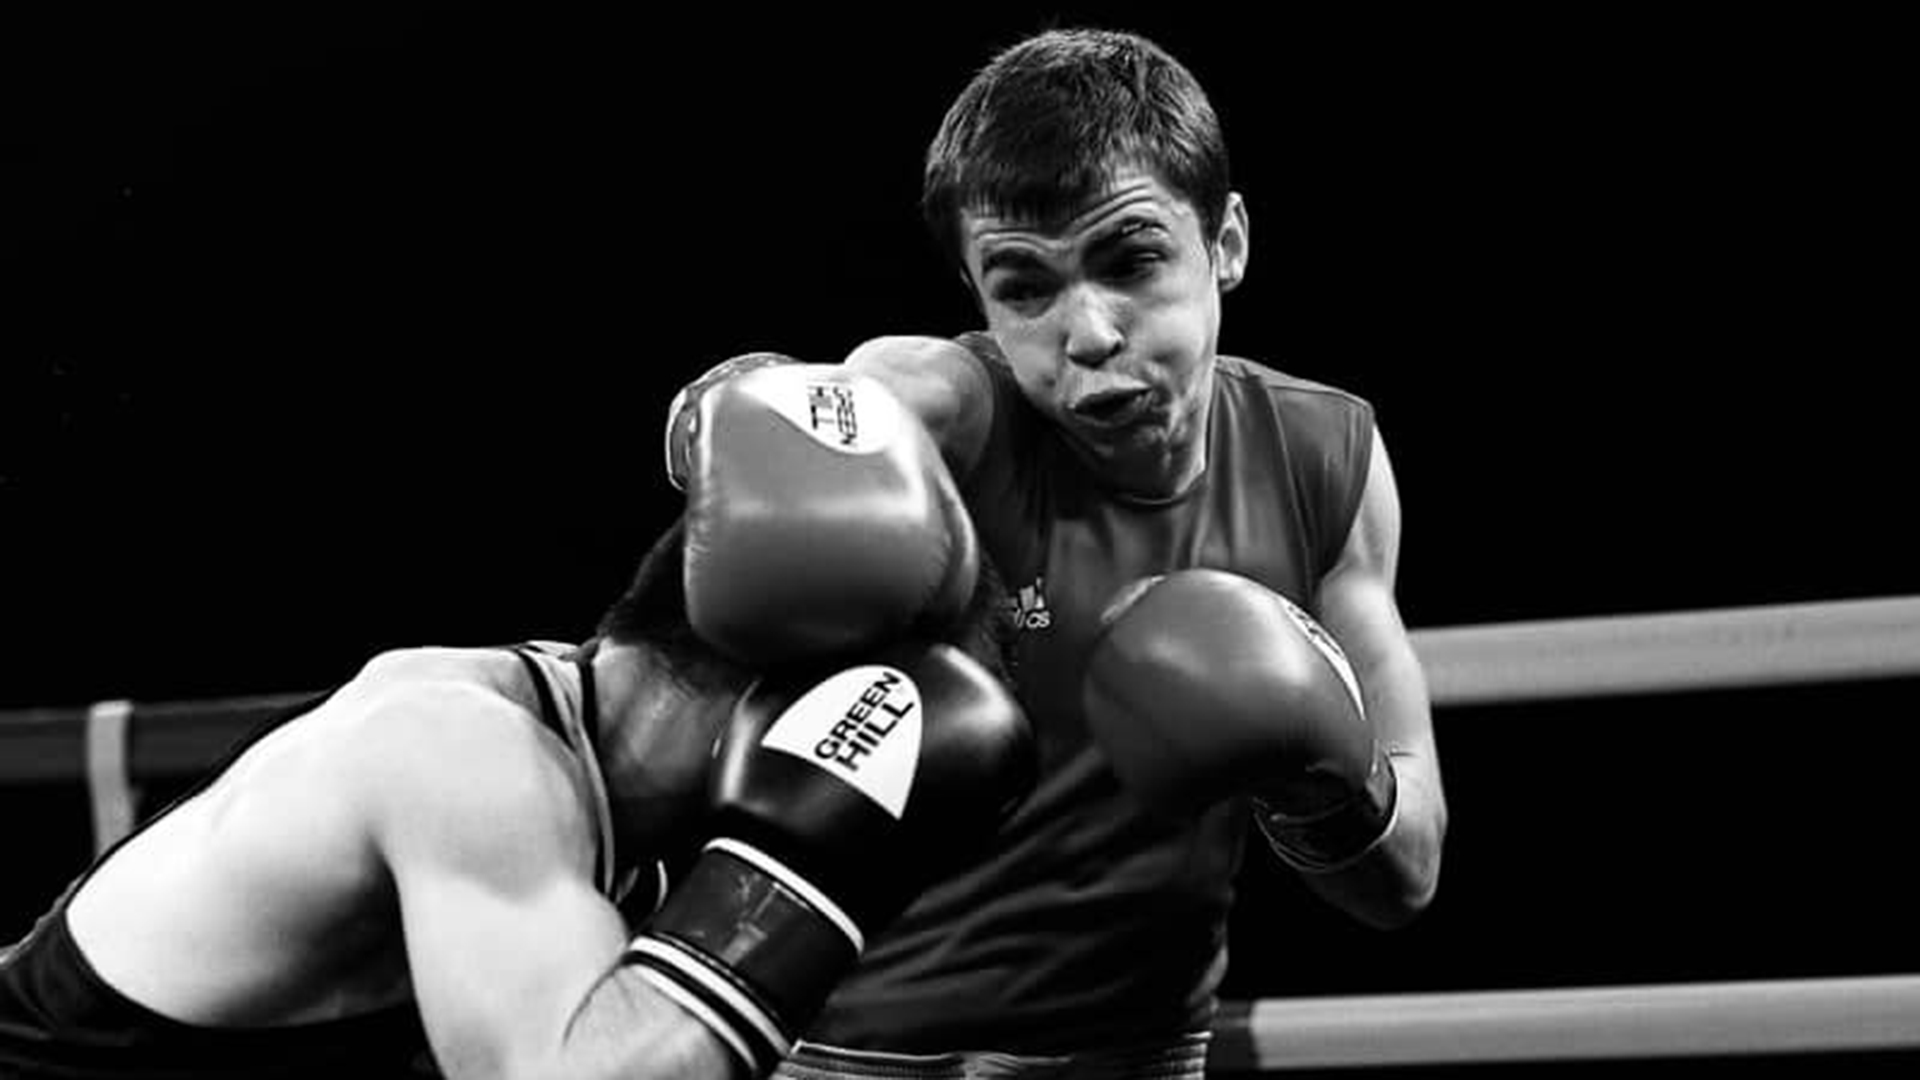 A hard goodbye: Maksym Galinichev died; the Ukrainian athlete who quit boxing to defend his country.